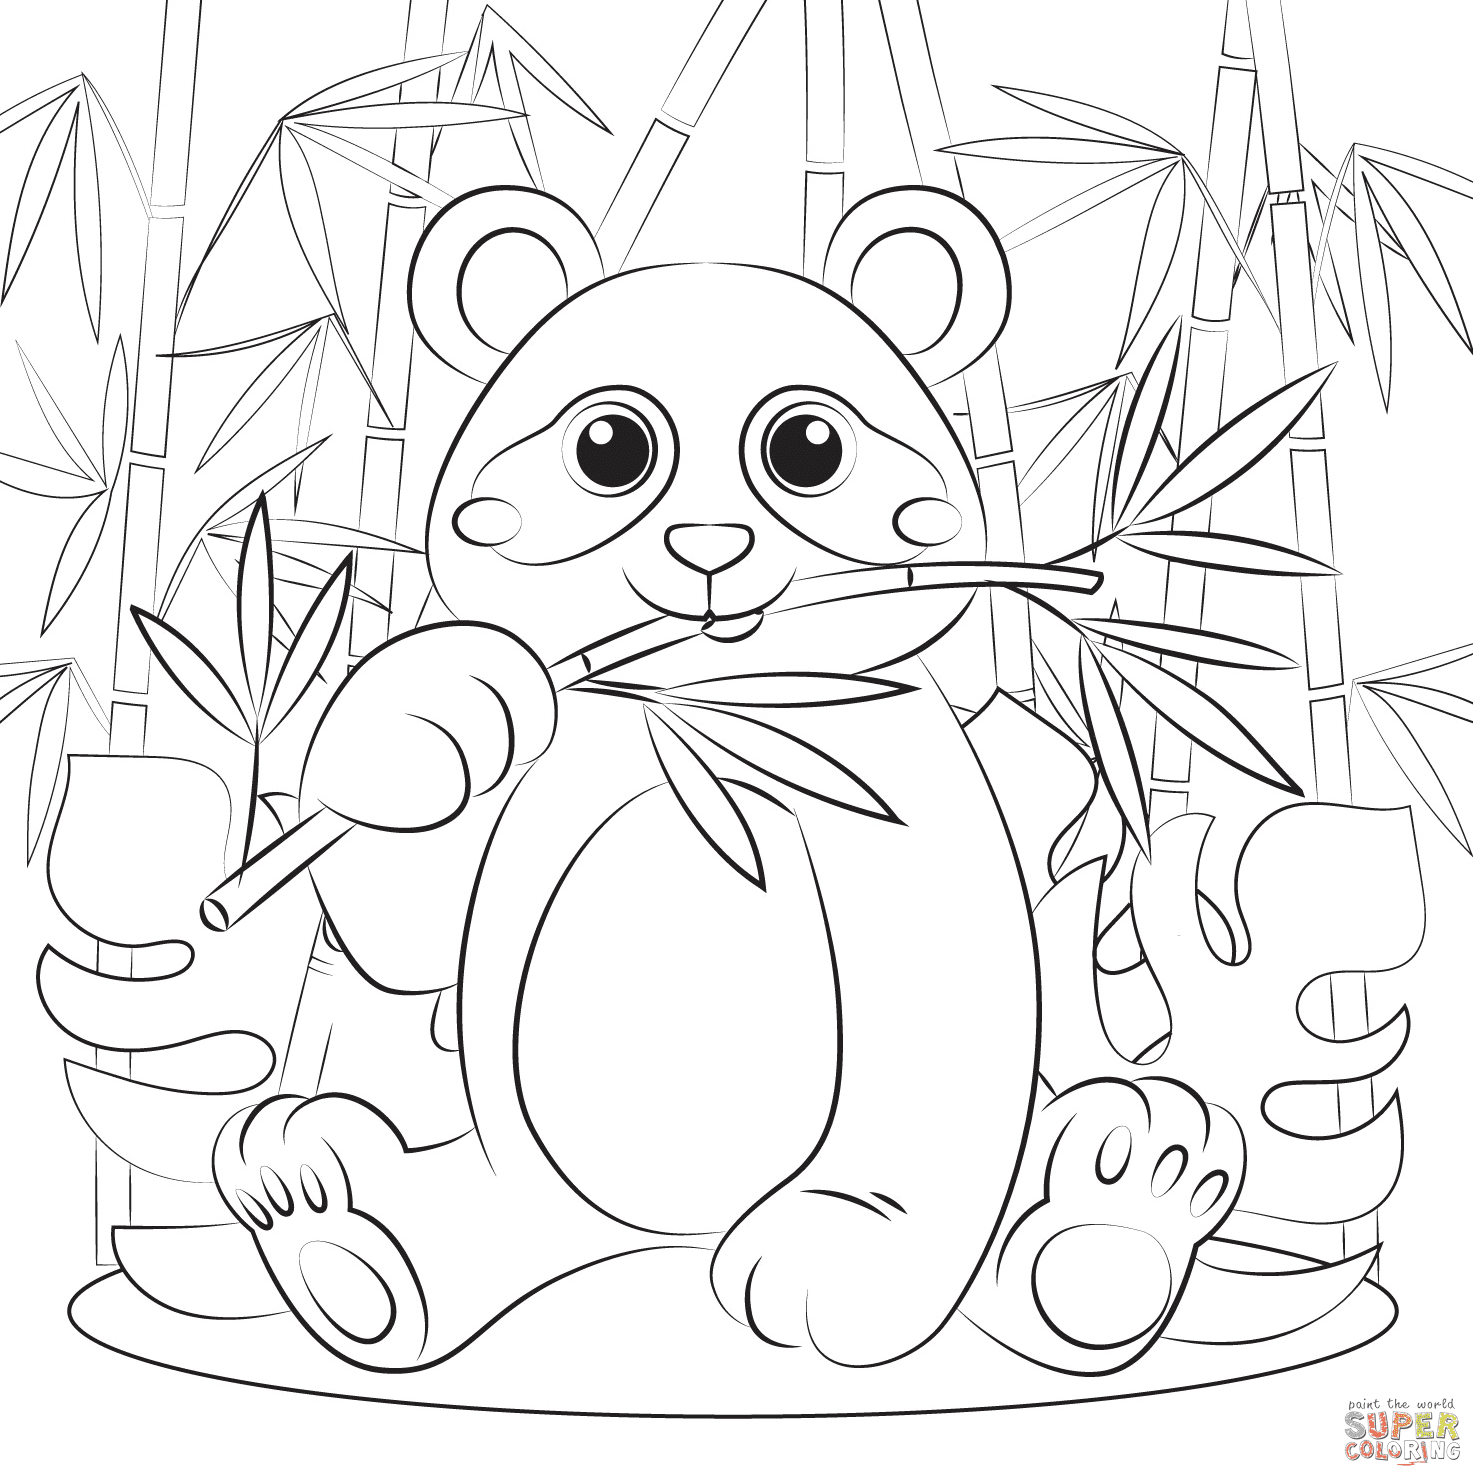 Panda with Bamboo Coloring Page